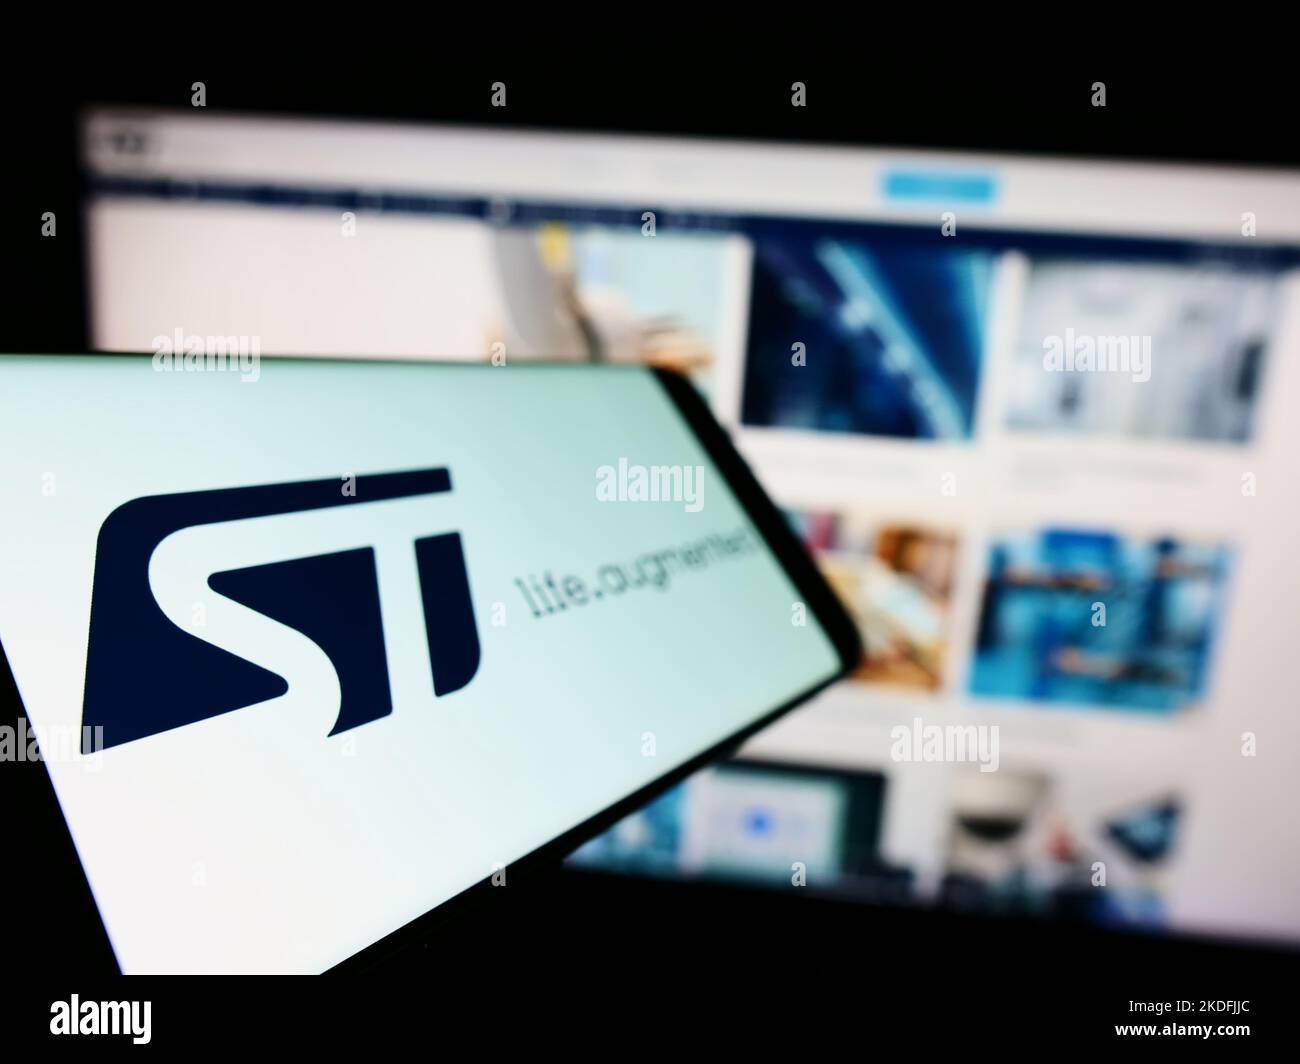 Smartphone with logo of semiconductor company STMicroelectronics N.V. on screen in front of business website. Focus on phone display. Stock Photo